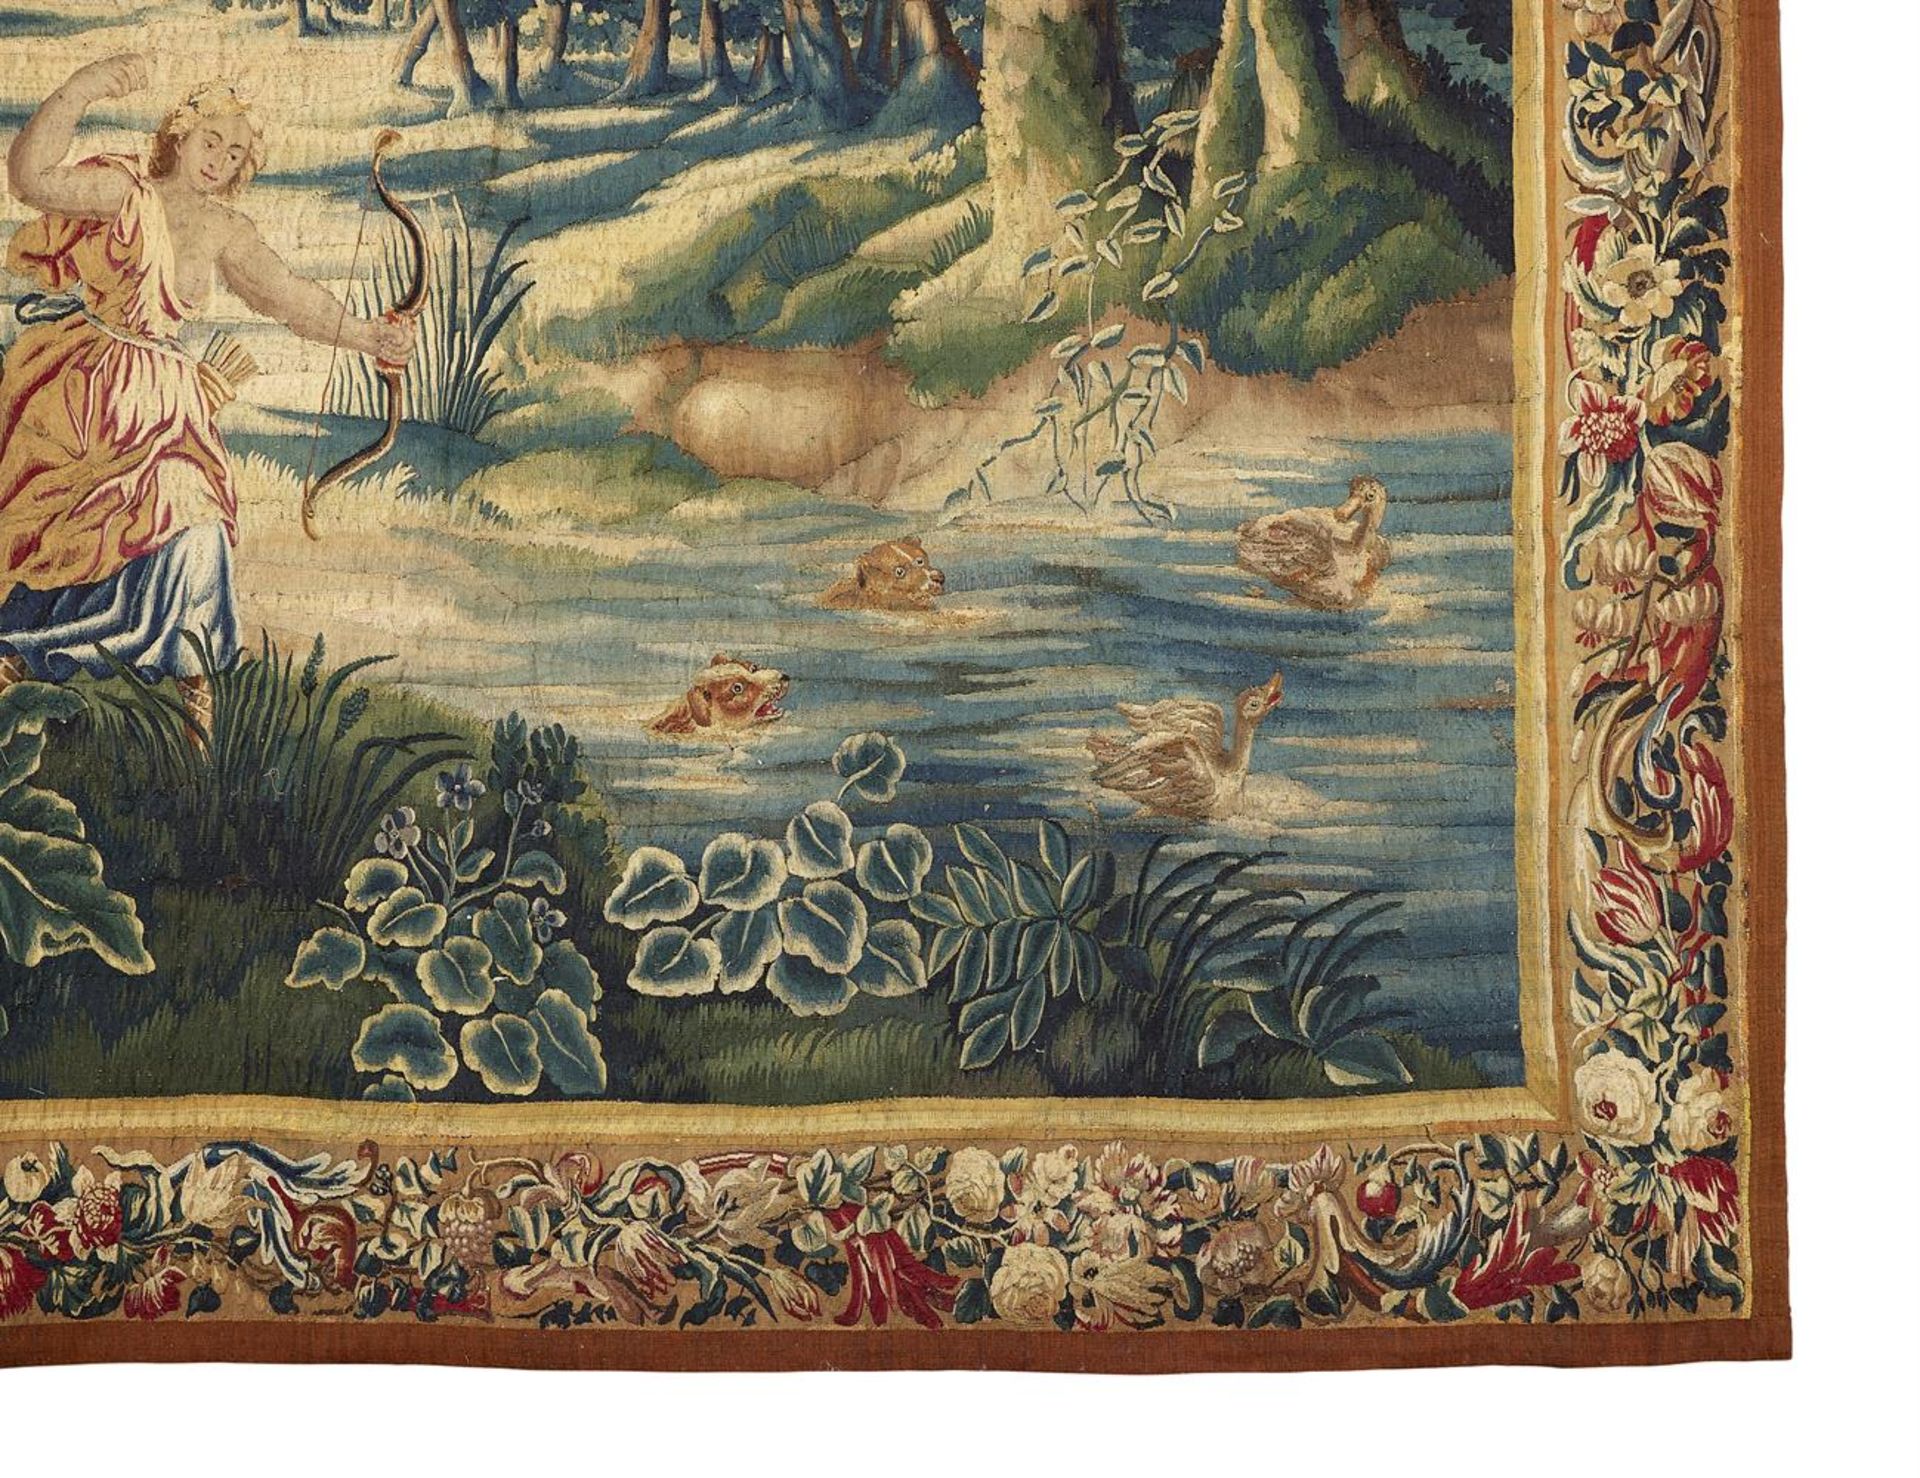 A FLEMISH MYTHOLOGICAL TAPESTRY OF DIANA THE HUNTRESS, LATE 17TH CENTURY/EARLY 18TH CENTURY - Image 2 of 3